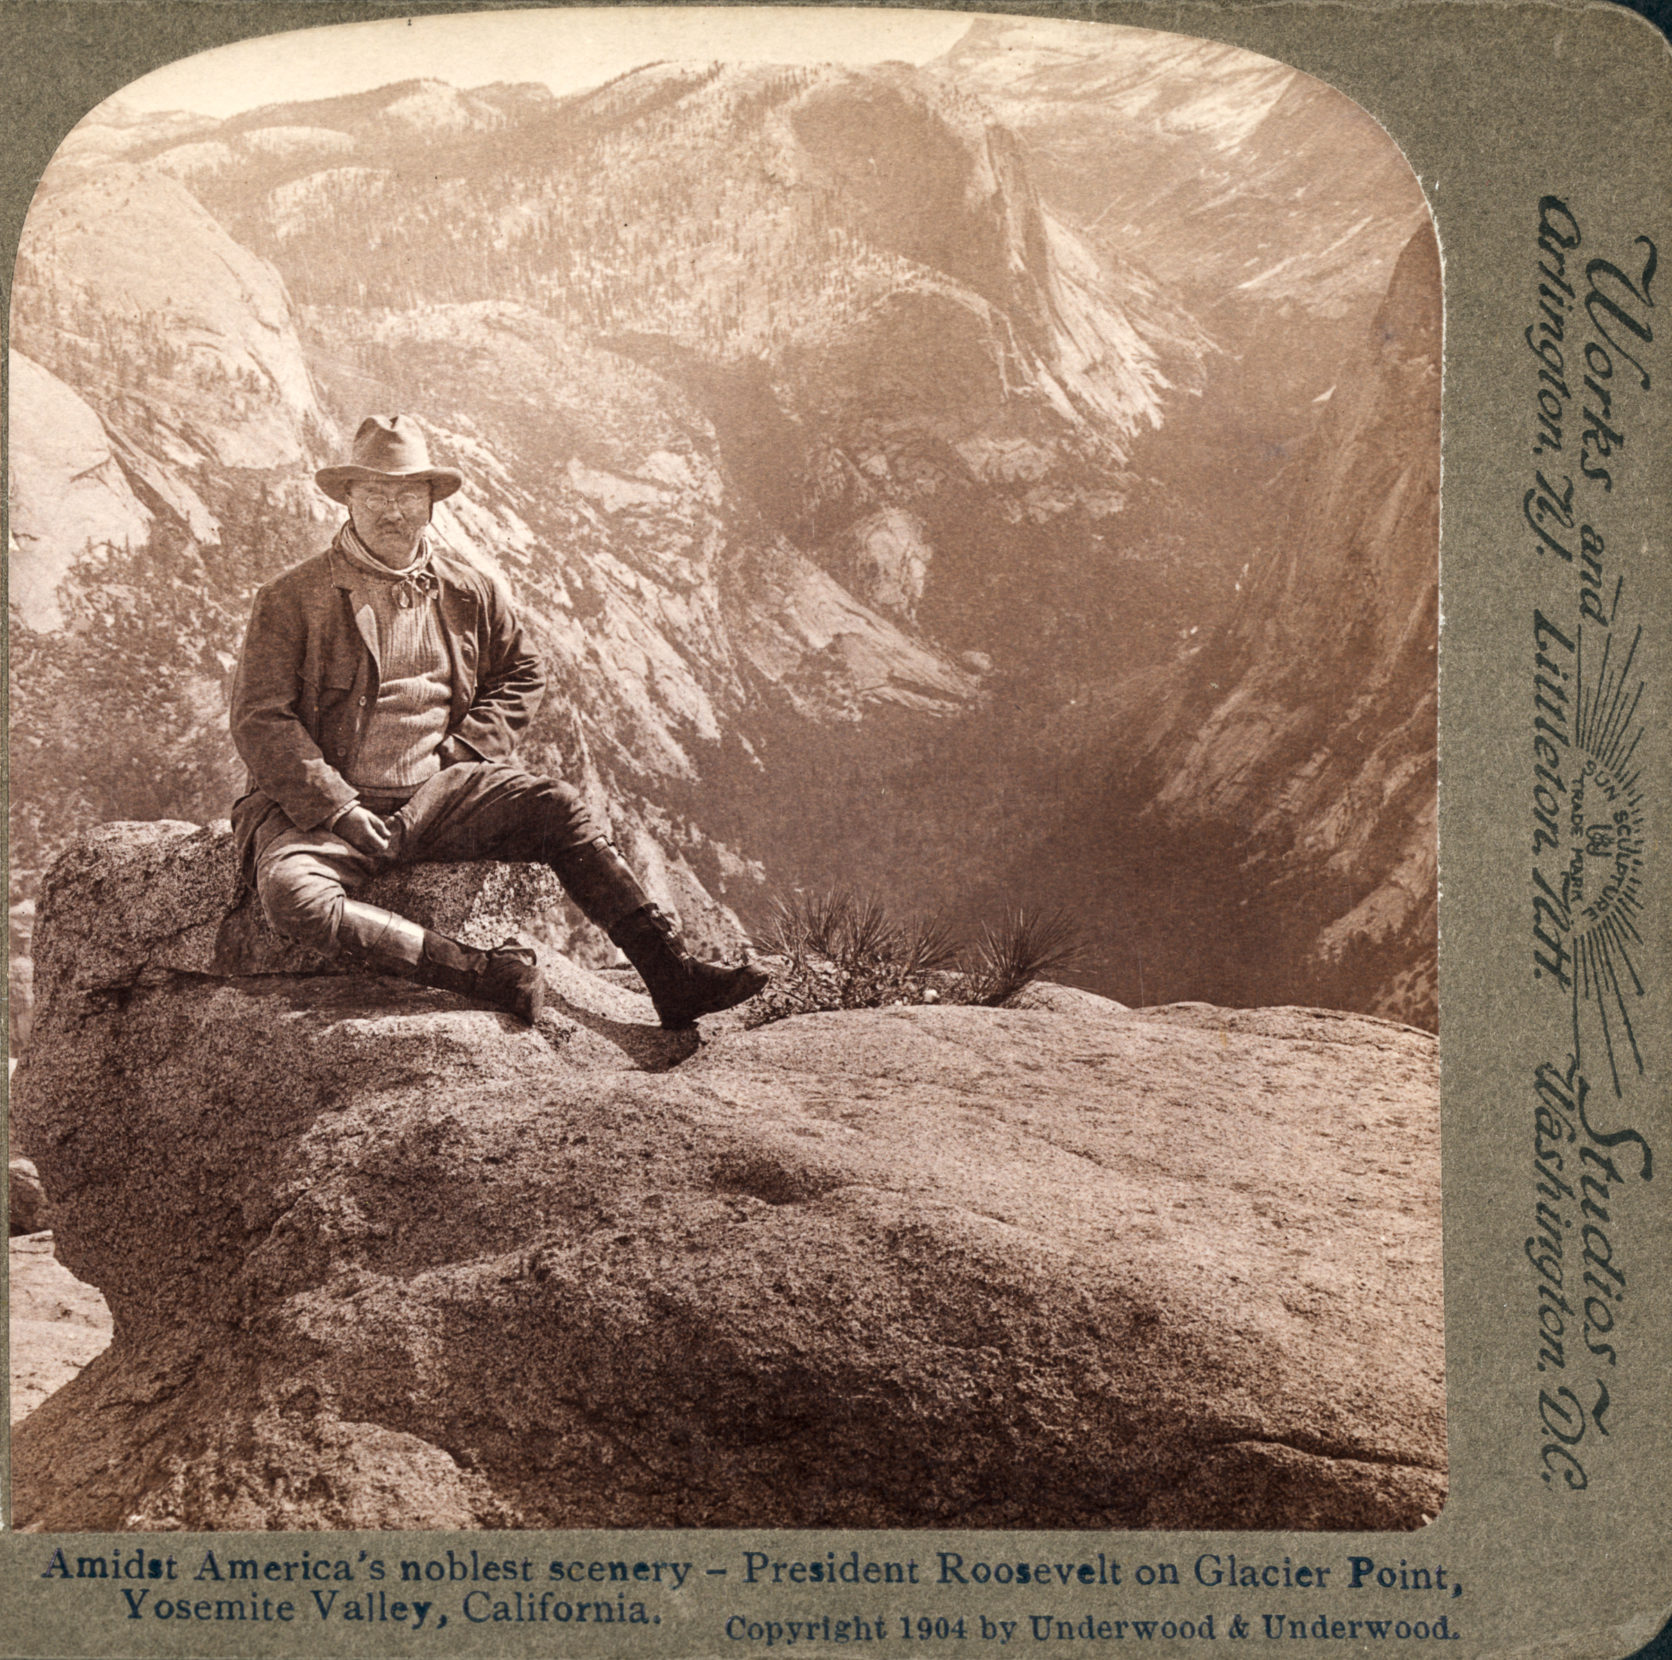 President Theodore Roosevelt poses at Glacier Point during his famed 1903 visit to Yosemite. Photo: Underwood & Underwood/Library of Congress.